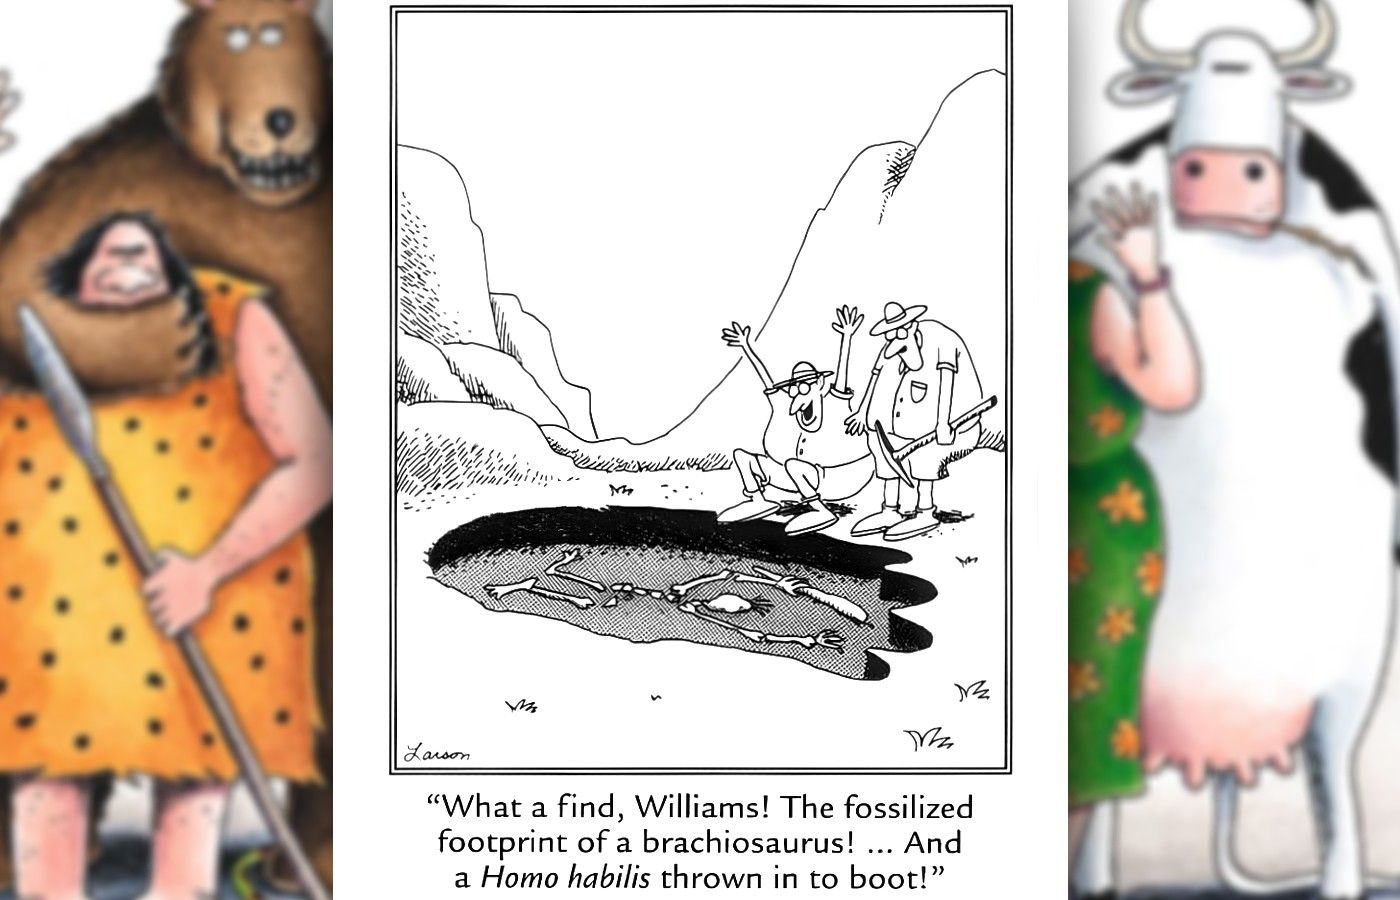 far side comic about a fossilized footprint